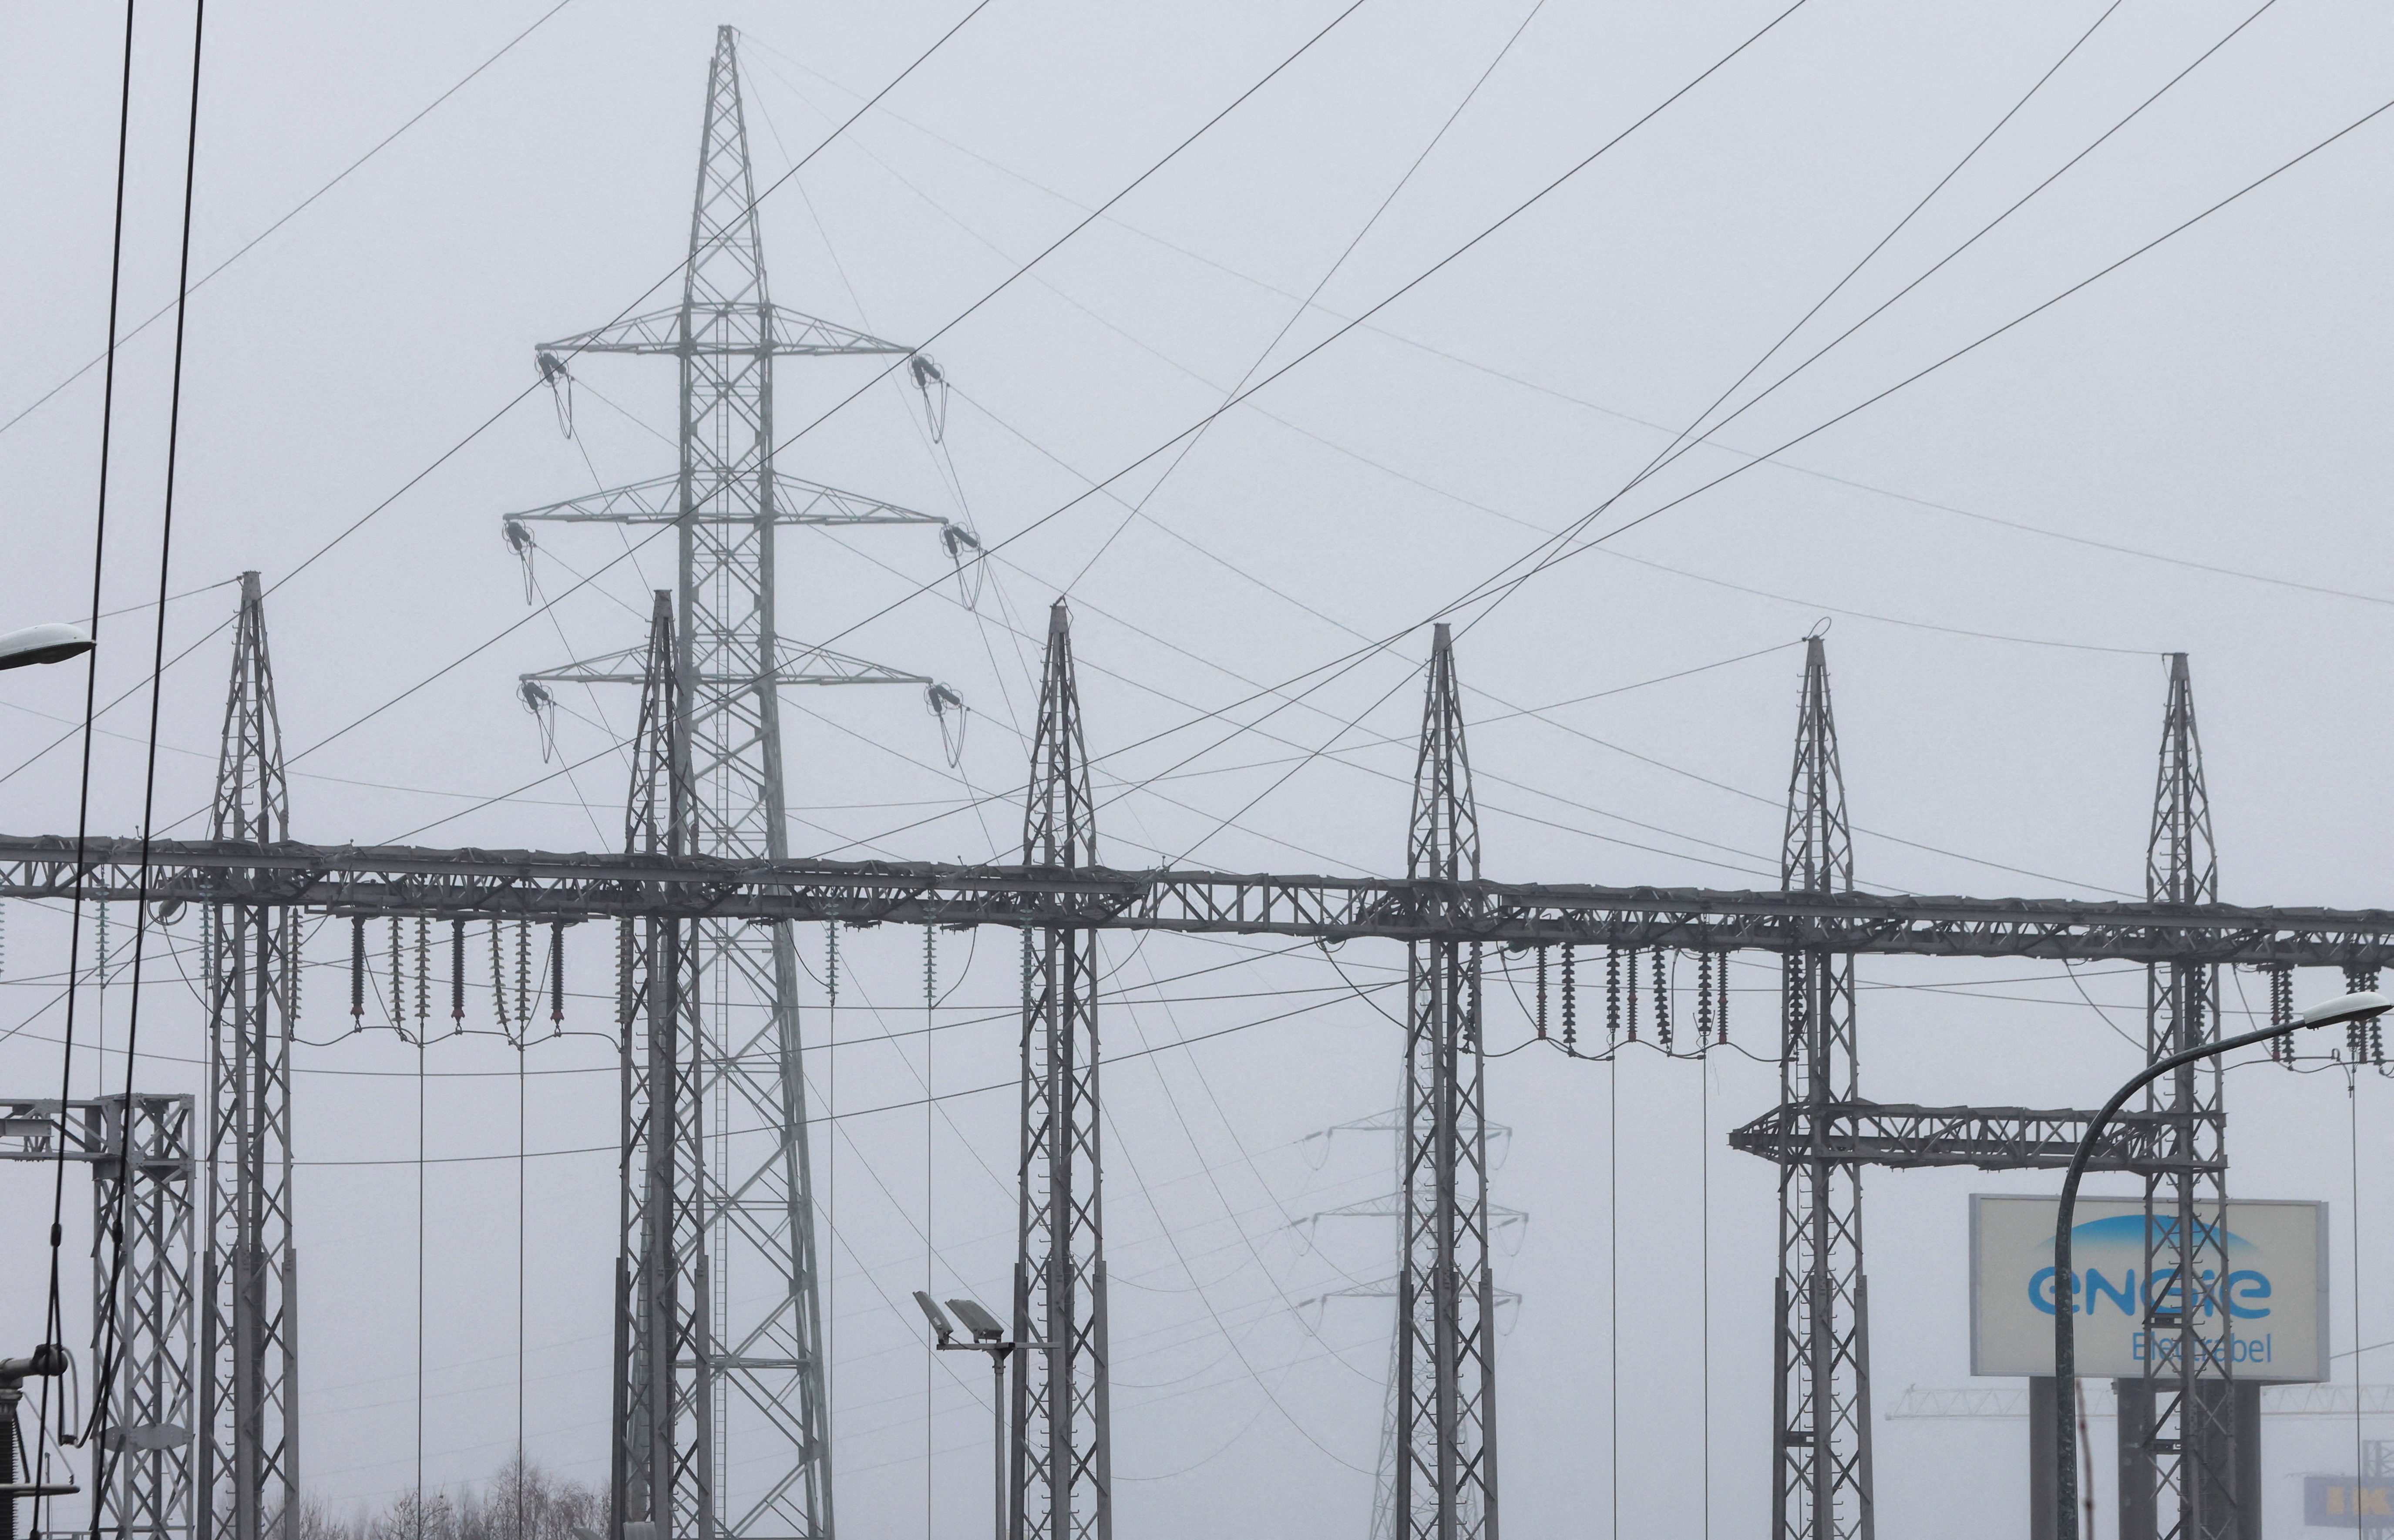 Electric pylons are seen at a combined-cycle gas turbine power plant in Drogenbos